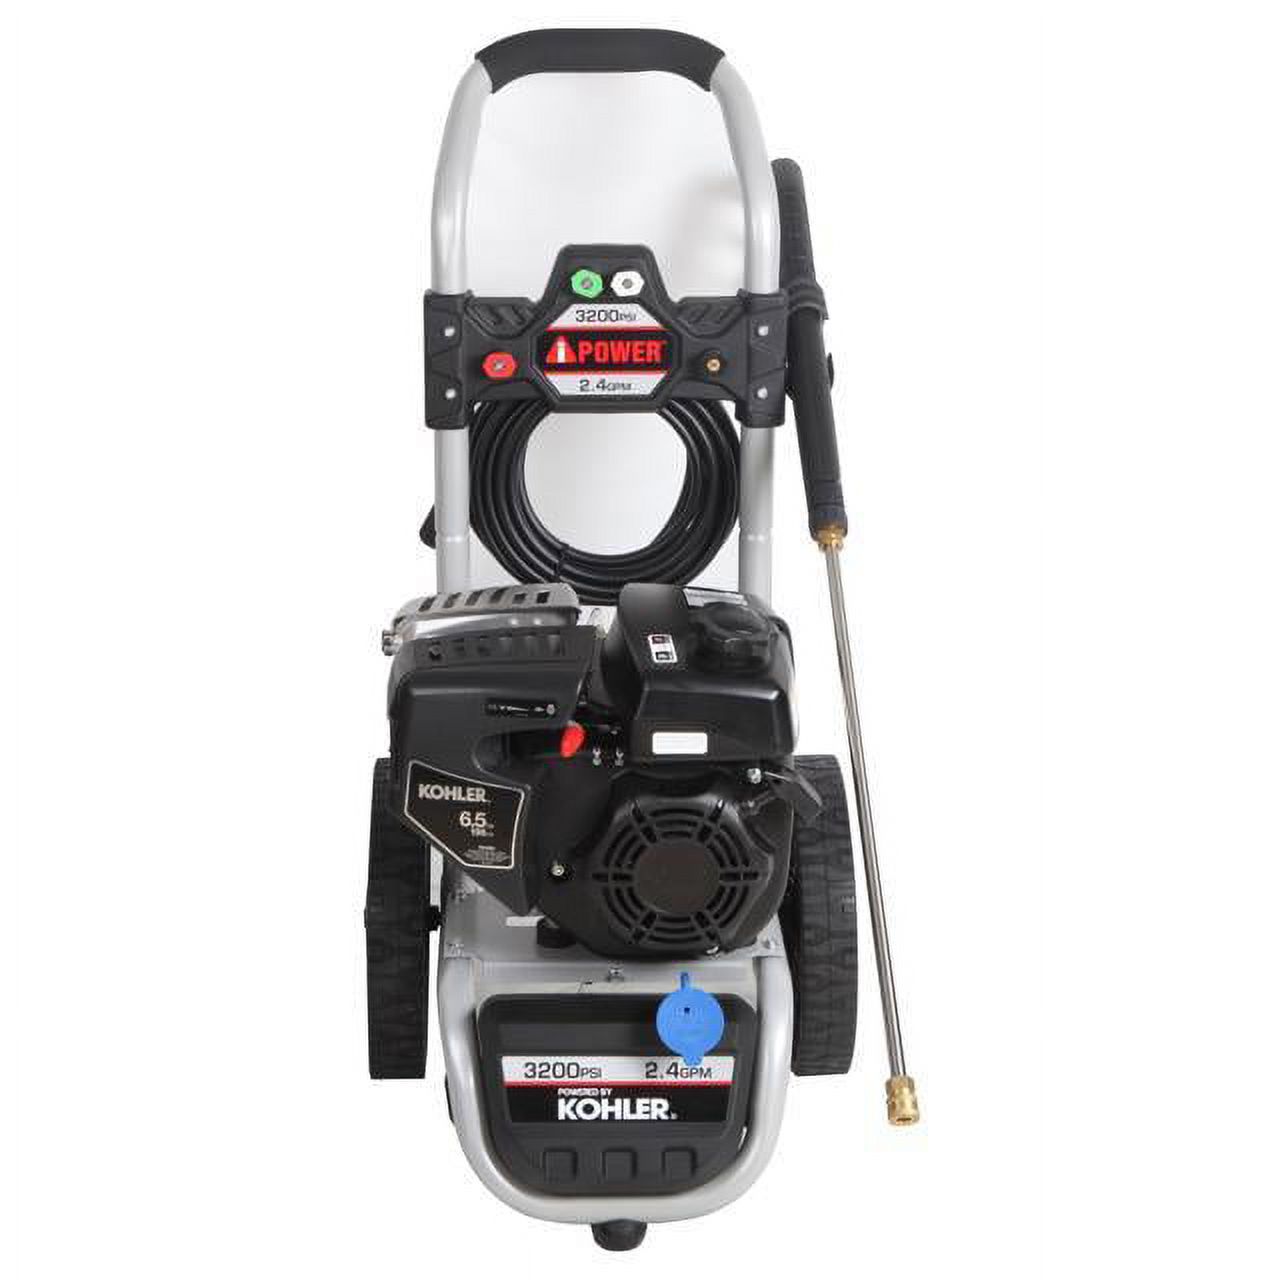 A-IPOWER Power Pressure Washer 3200 PSI Pressure Washer Kohler Engine 2.4 GPM APW3200KH - image 2 of 5